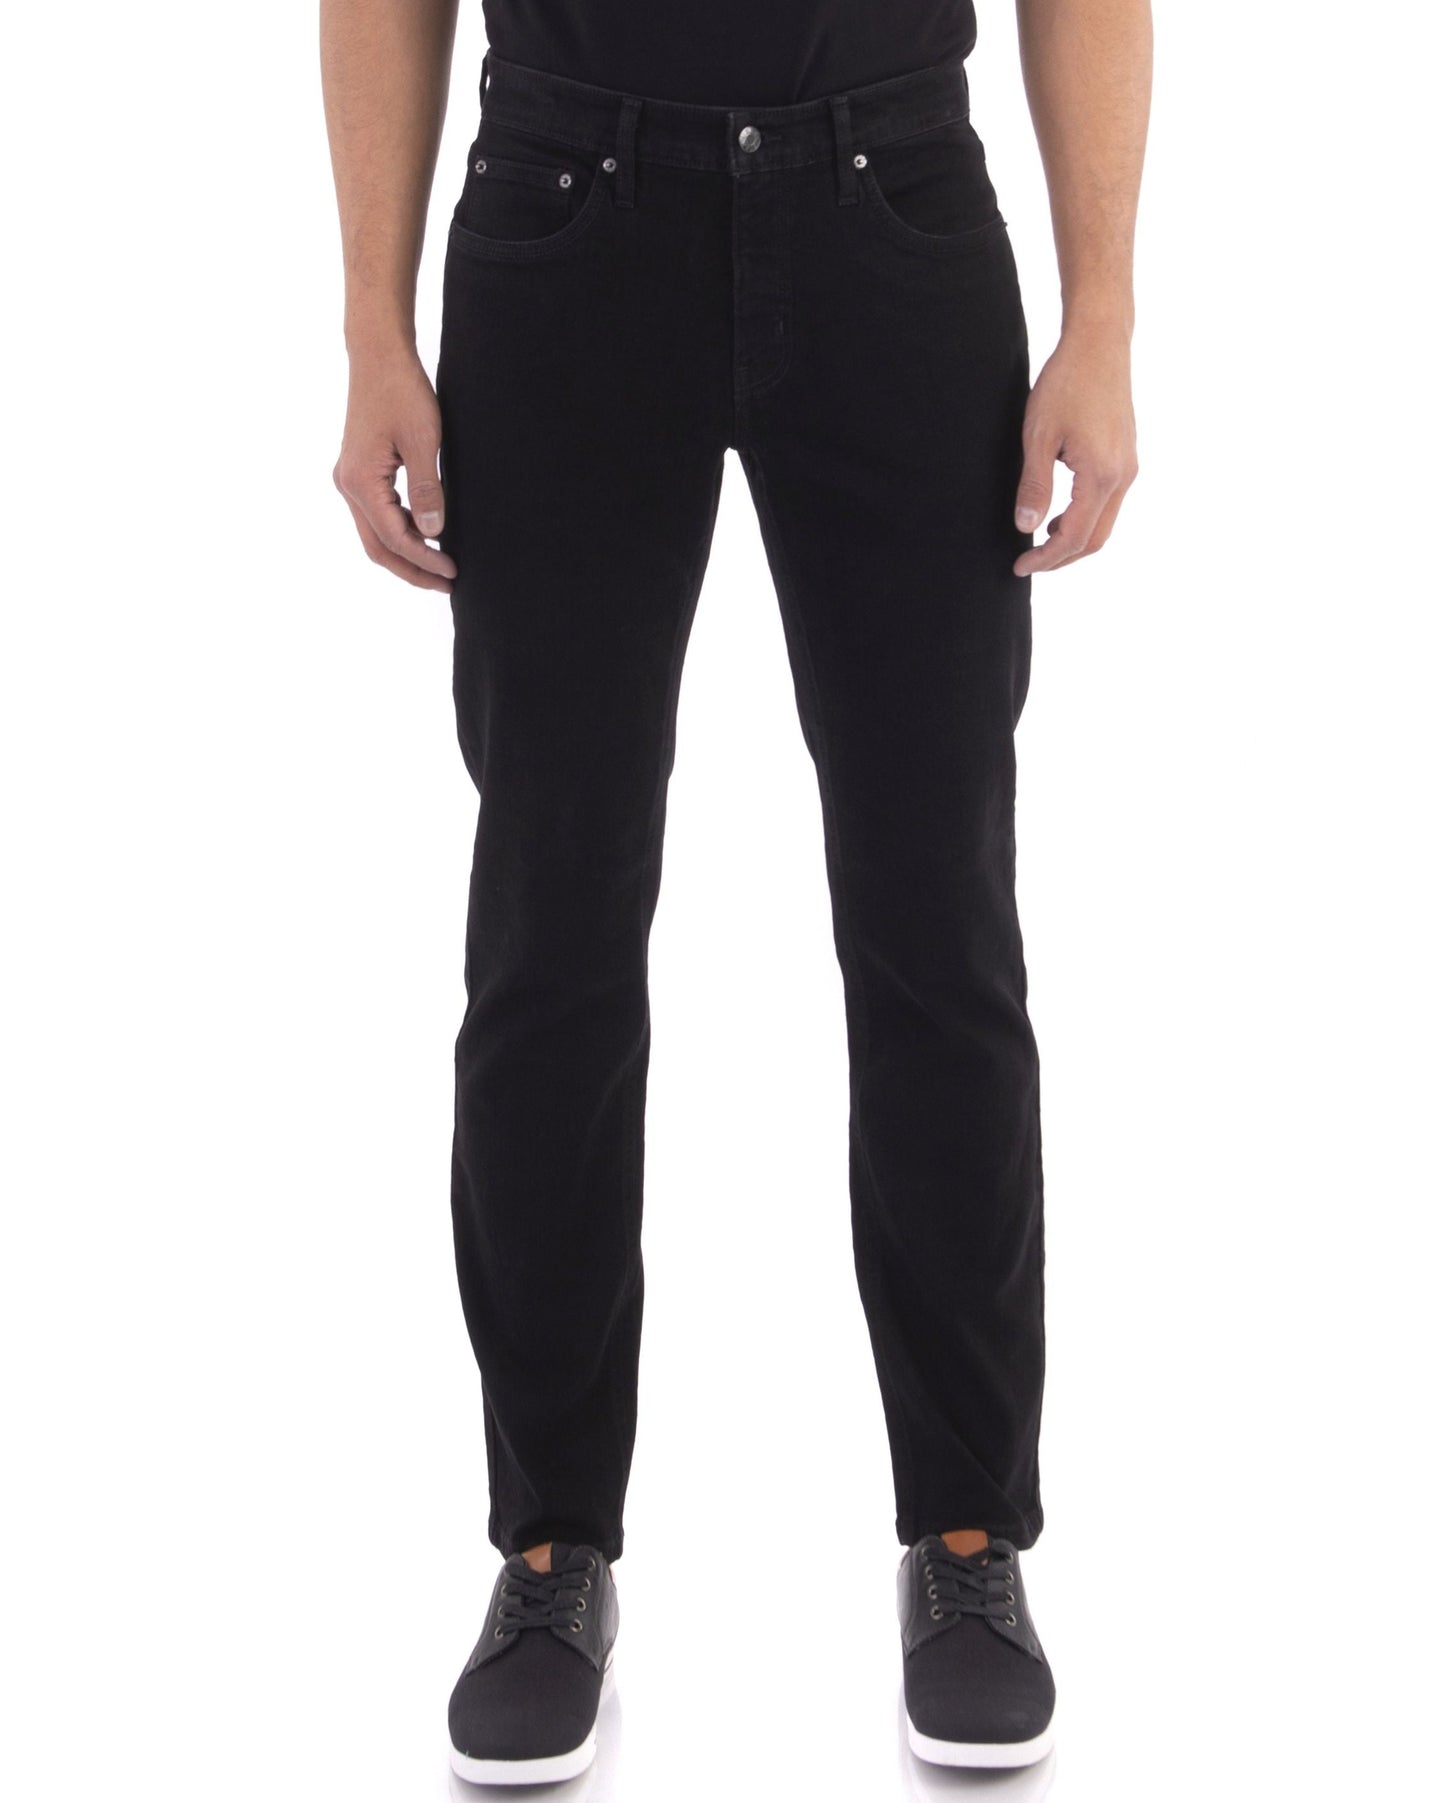 classic black jeans with black stitch, silver button. slim fit